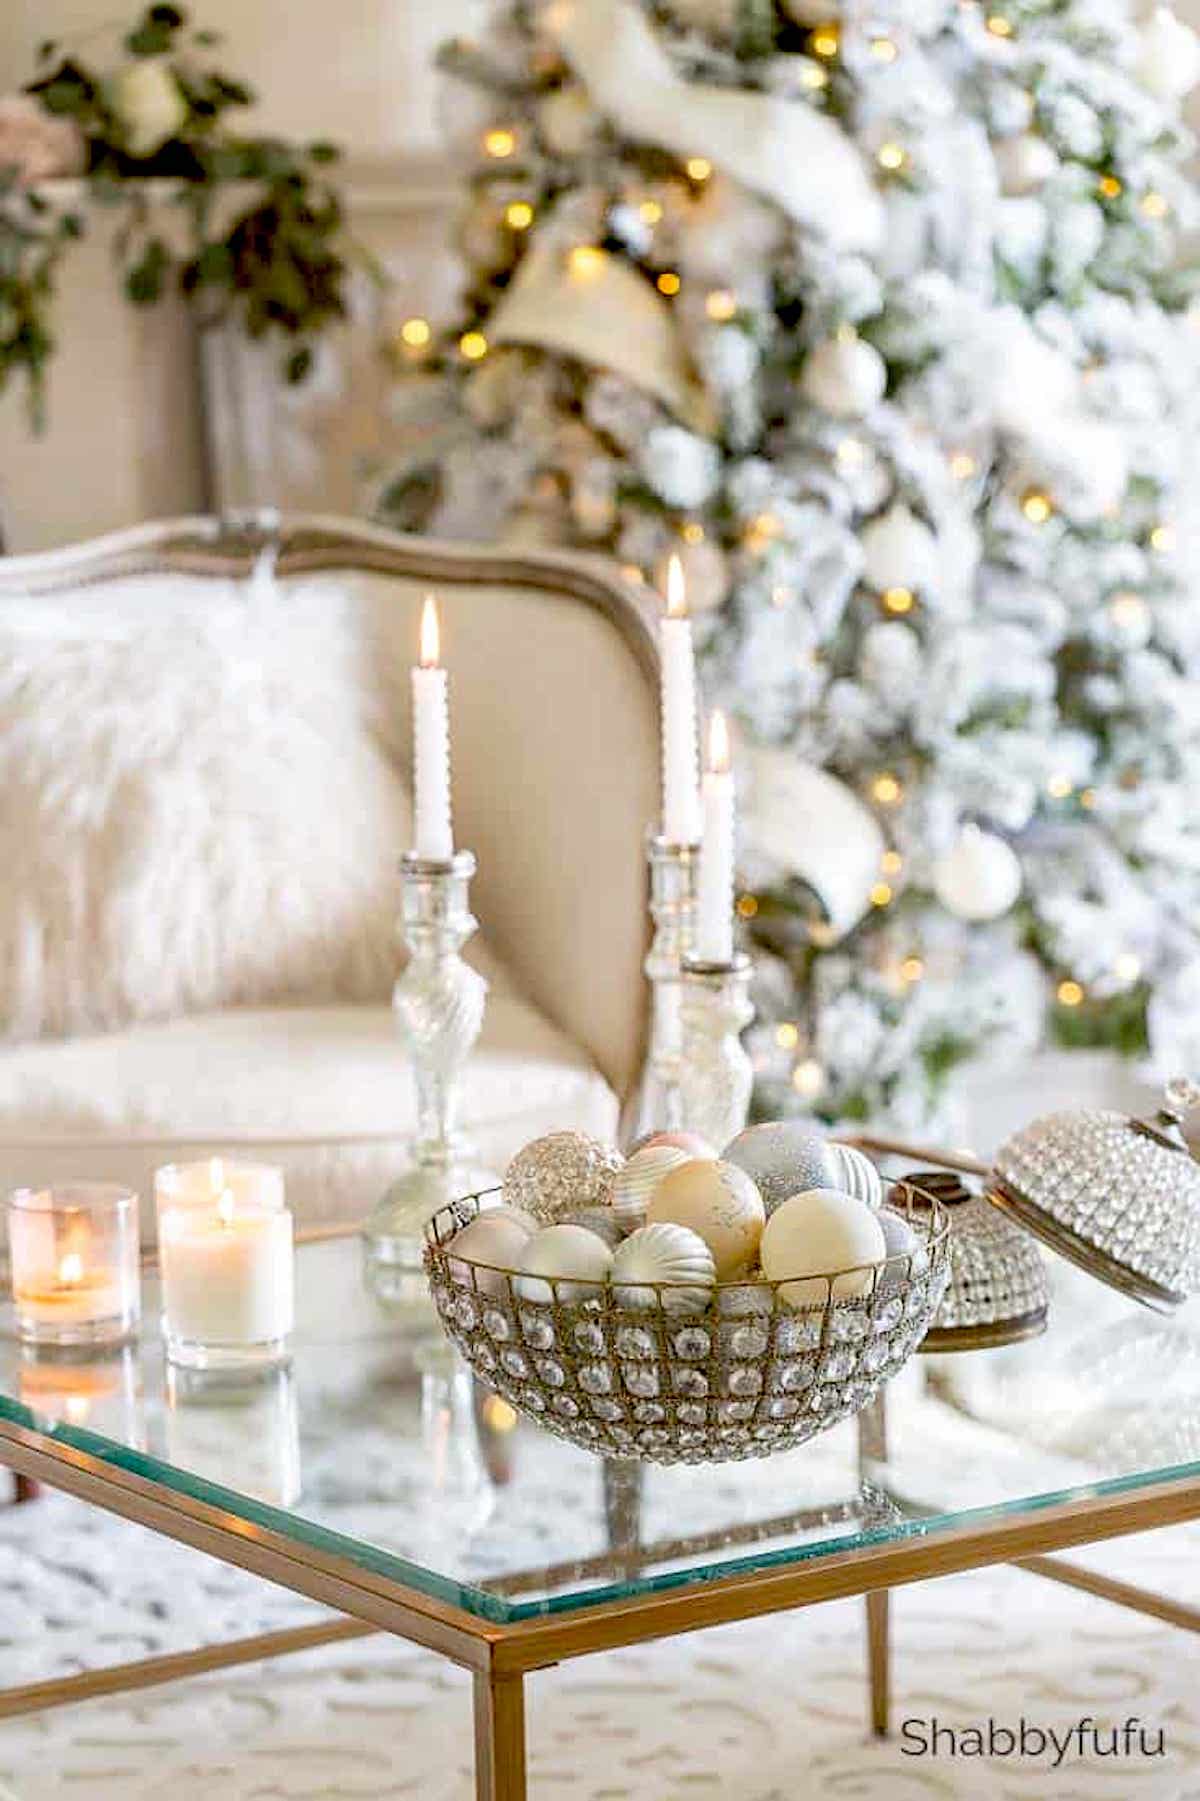 Christmas From The Archives & Fashion Favorites! French Country Fridays 347